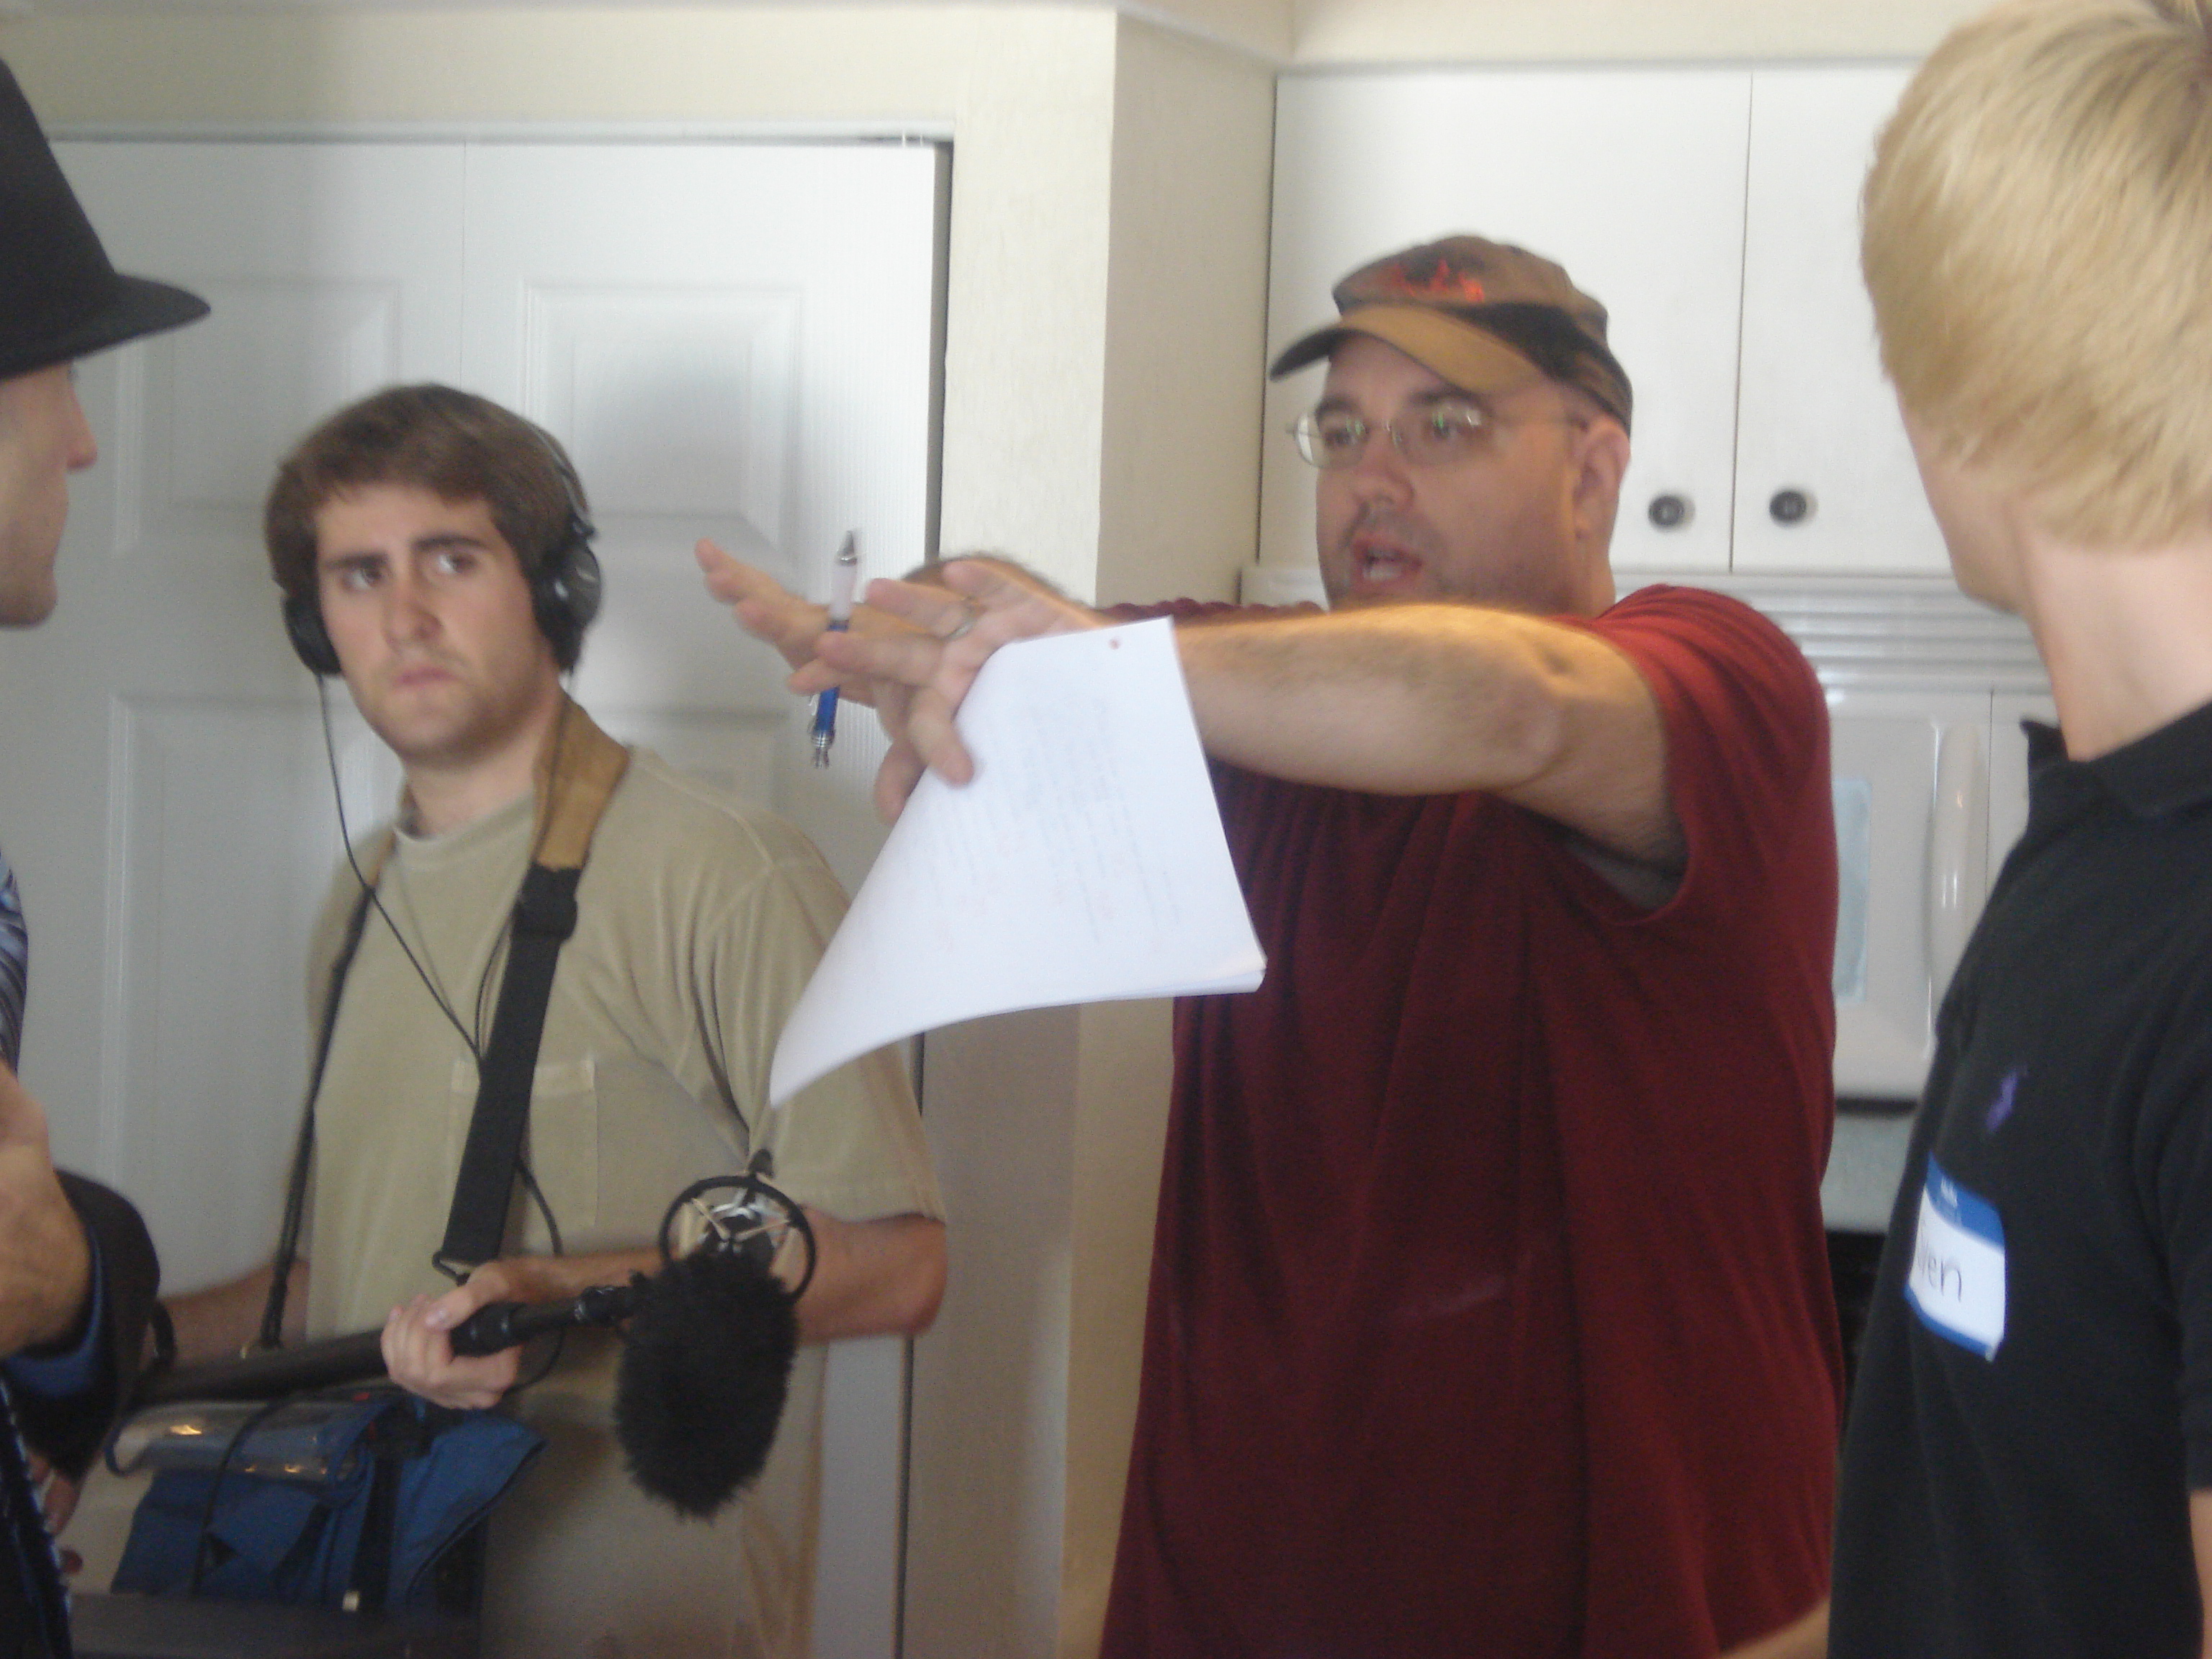 Director Donald E. Reynolds on the set of The Circle of Men, with Boom Operator Eavan Sullivan and actors.